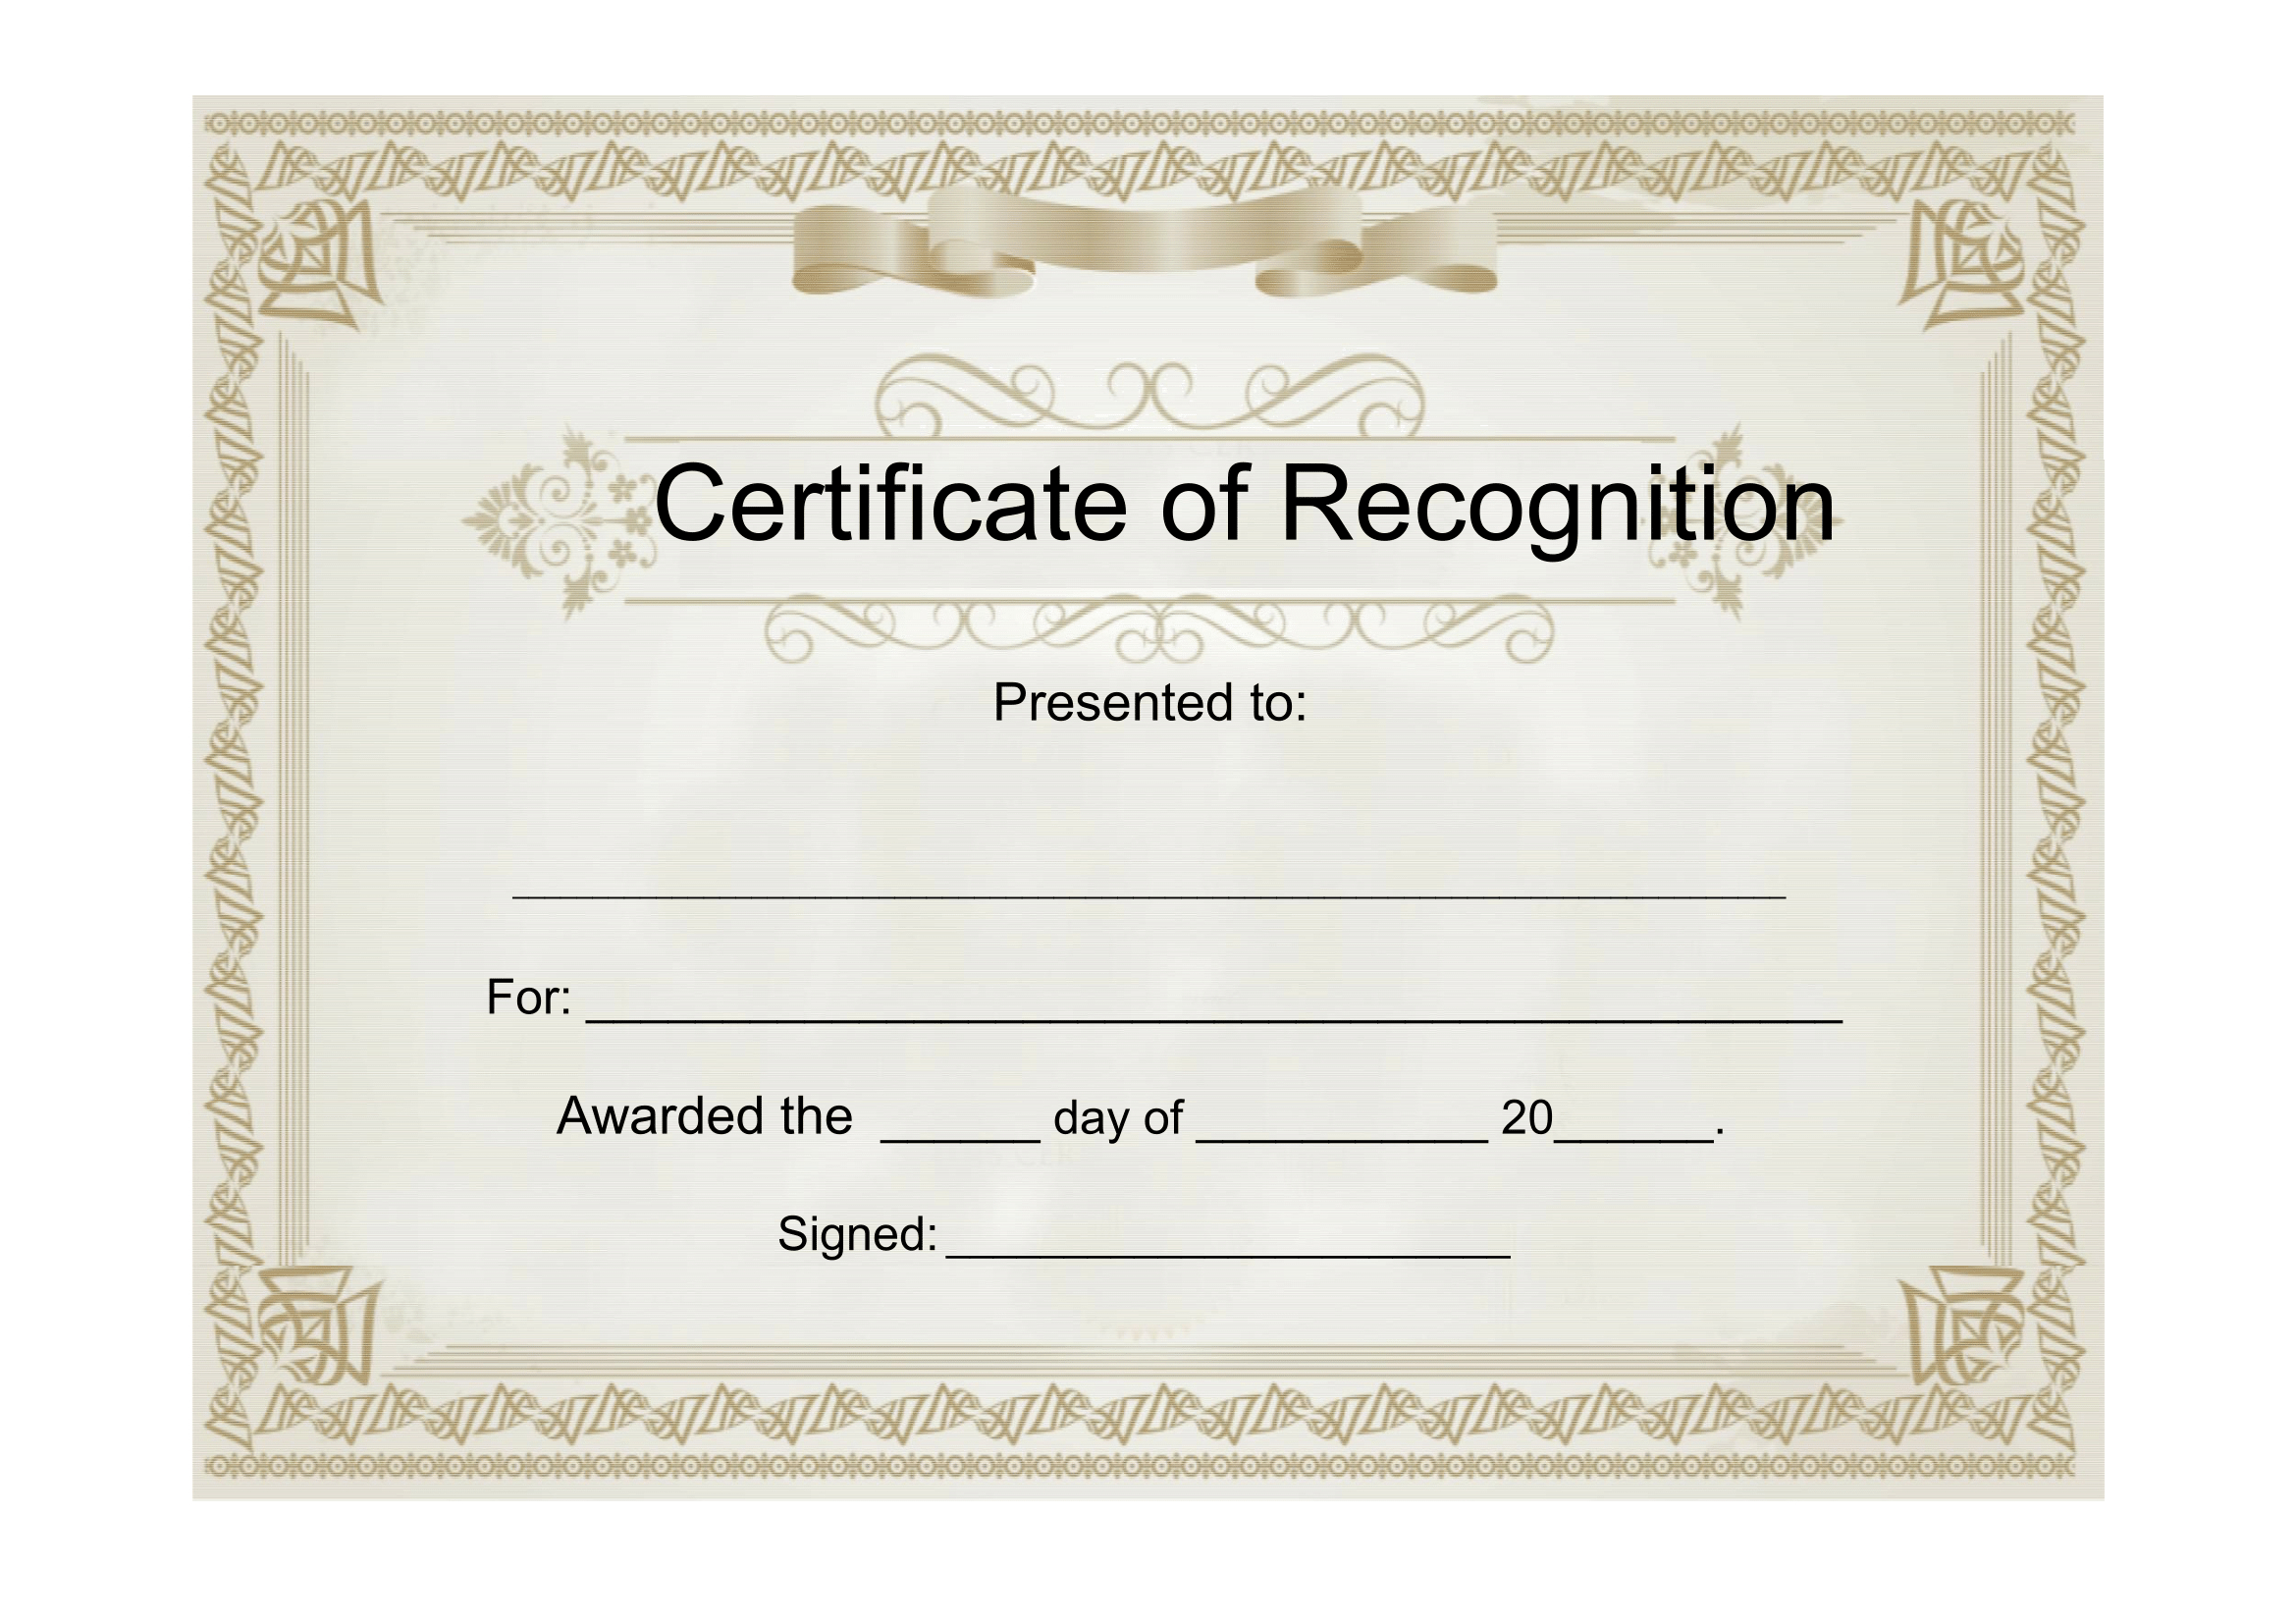 Sample Certificate Of Recognition – Free Download Template Throughout Free Template For Certificate Of Recognition